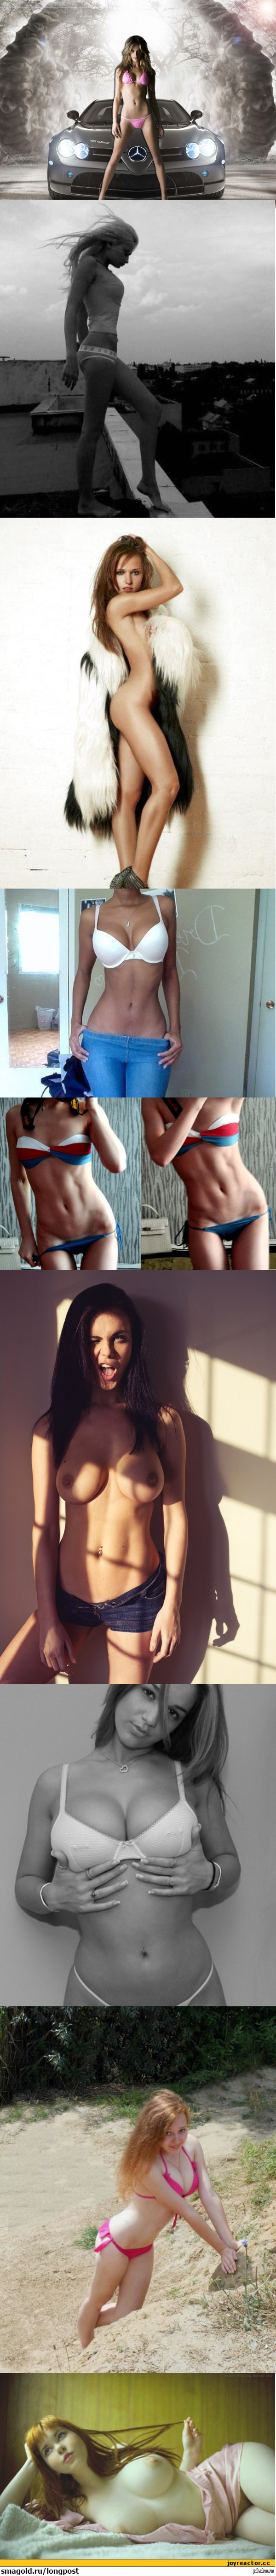 Such different versions of female beauty) - NSFW, Strawberry, Girls, Skinny, Athletic body, Fullness, Longpost